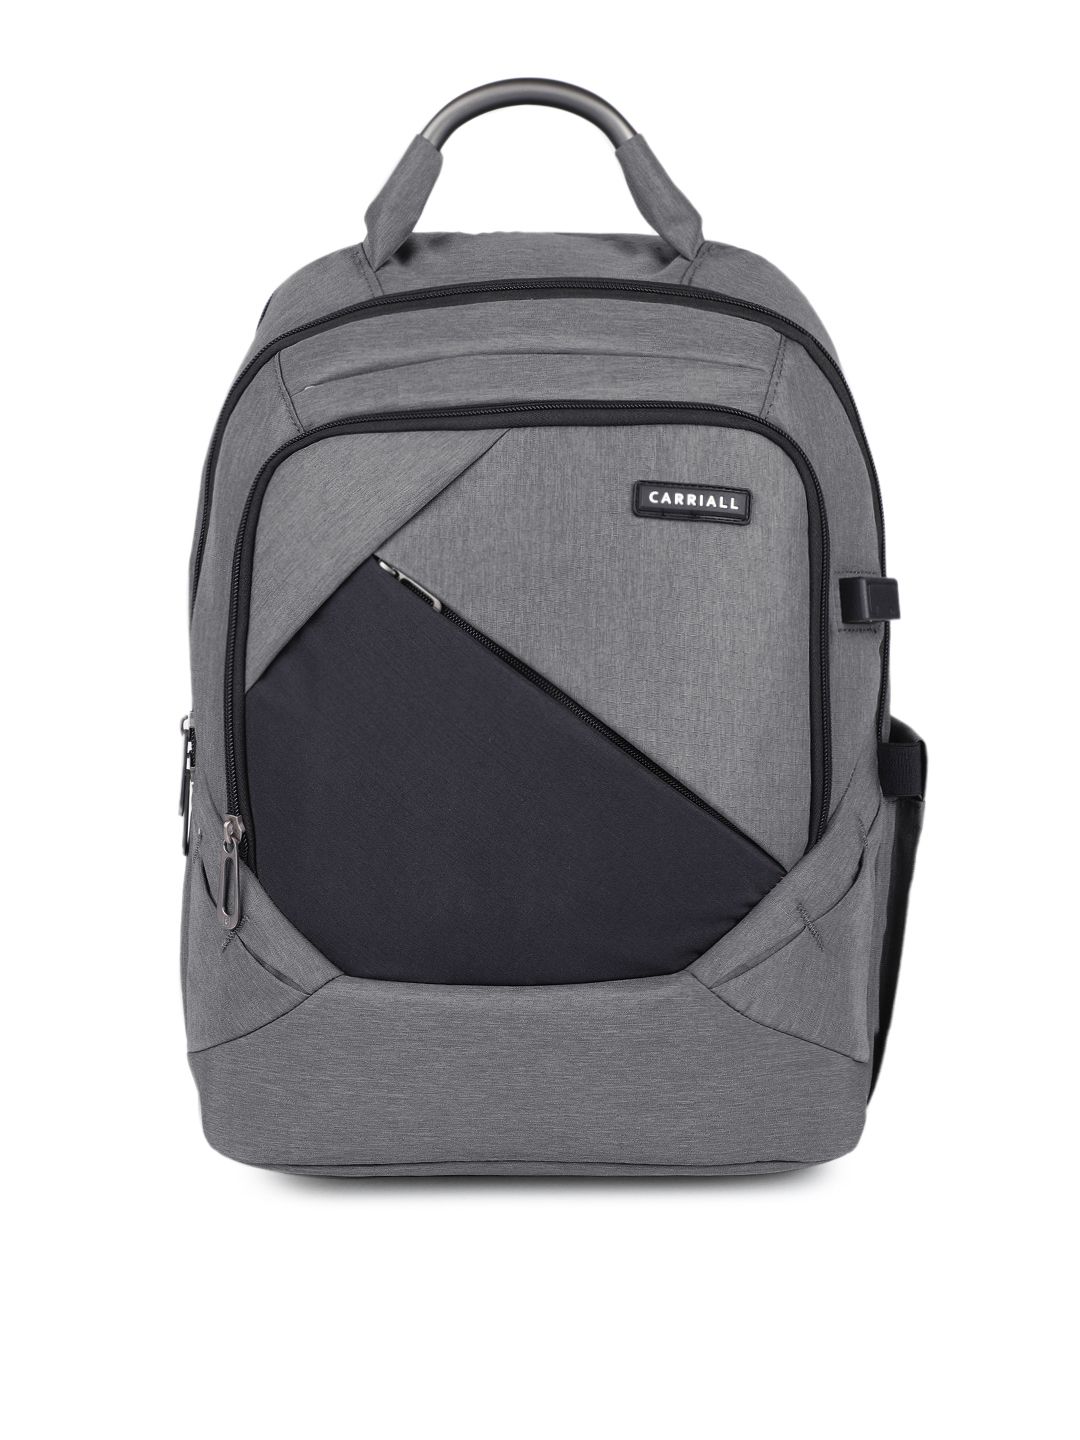 CARRIALL Unisex Grey & Black Colourblocked Smart Laptop Backpack with Charging port Price in India